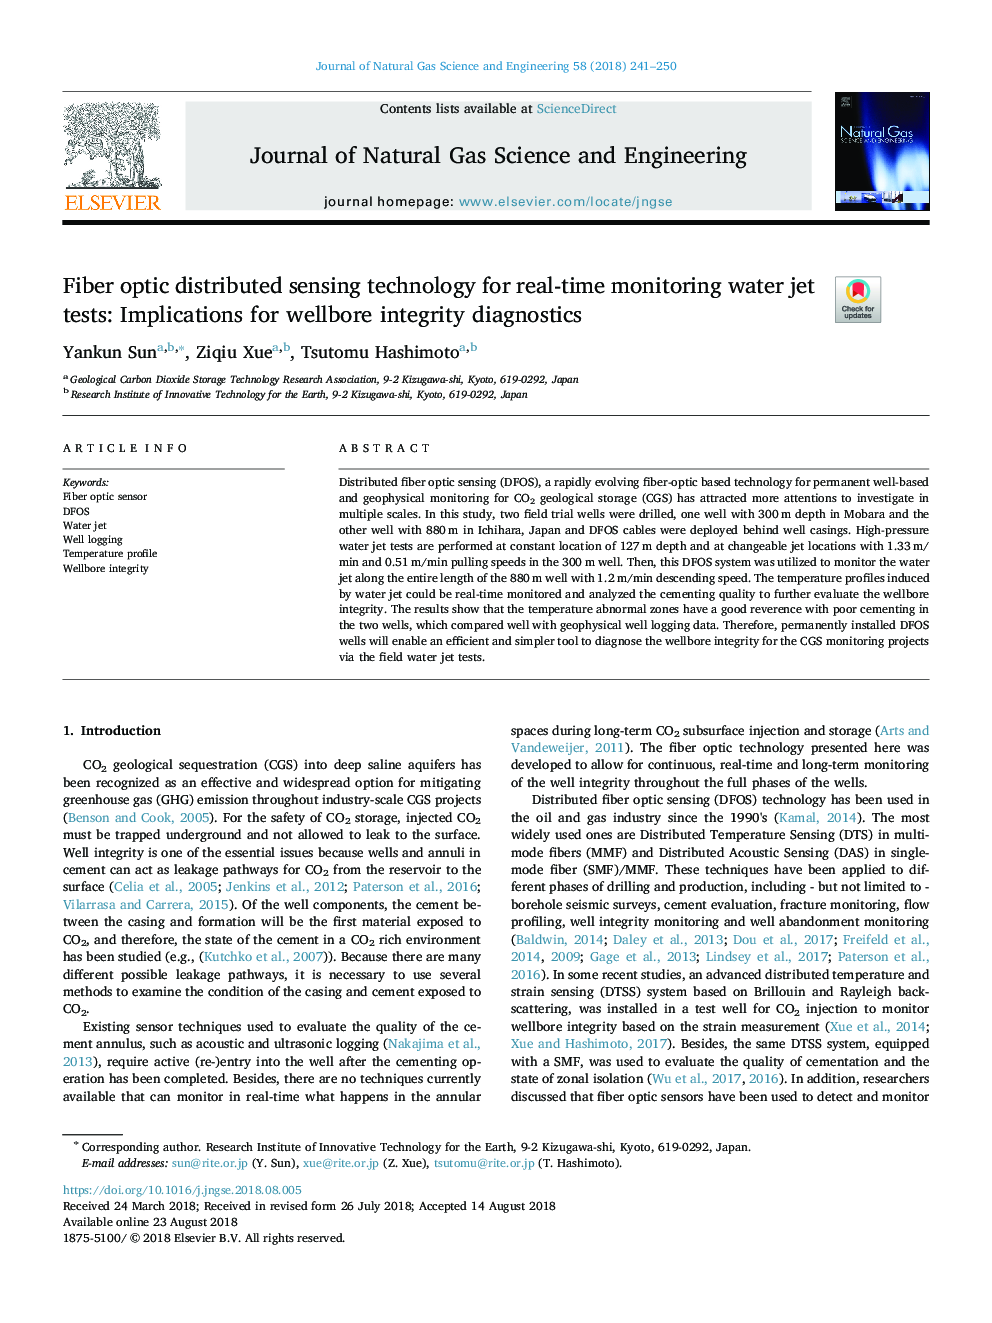 Fiber optic distributed sensing technology for real-time monitoring water jet tests: Implications for wellbore integrity diagnostics